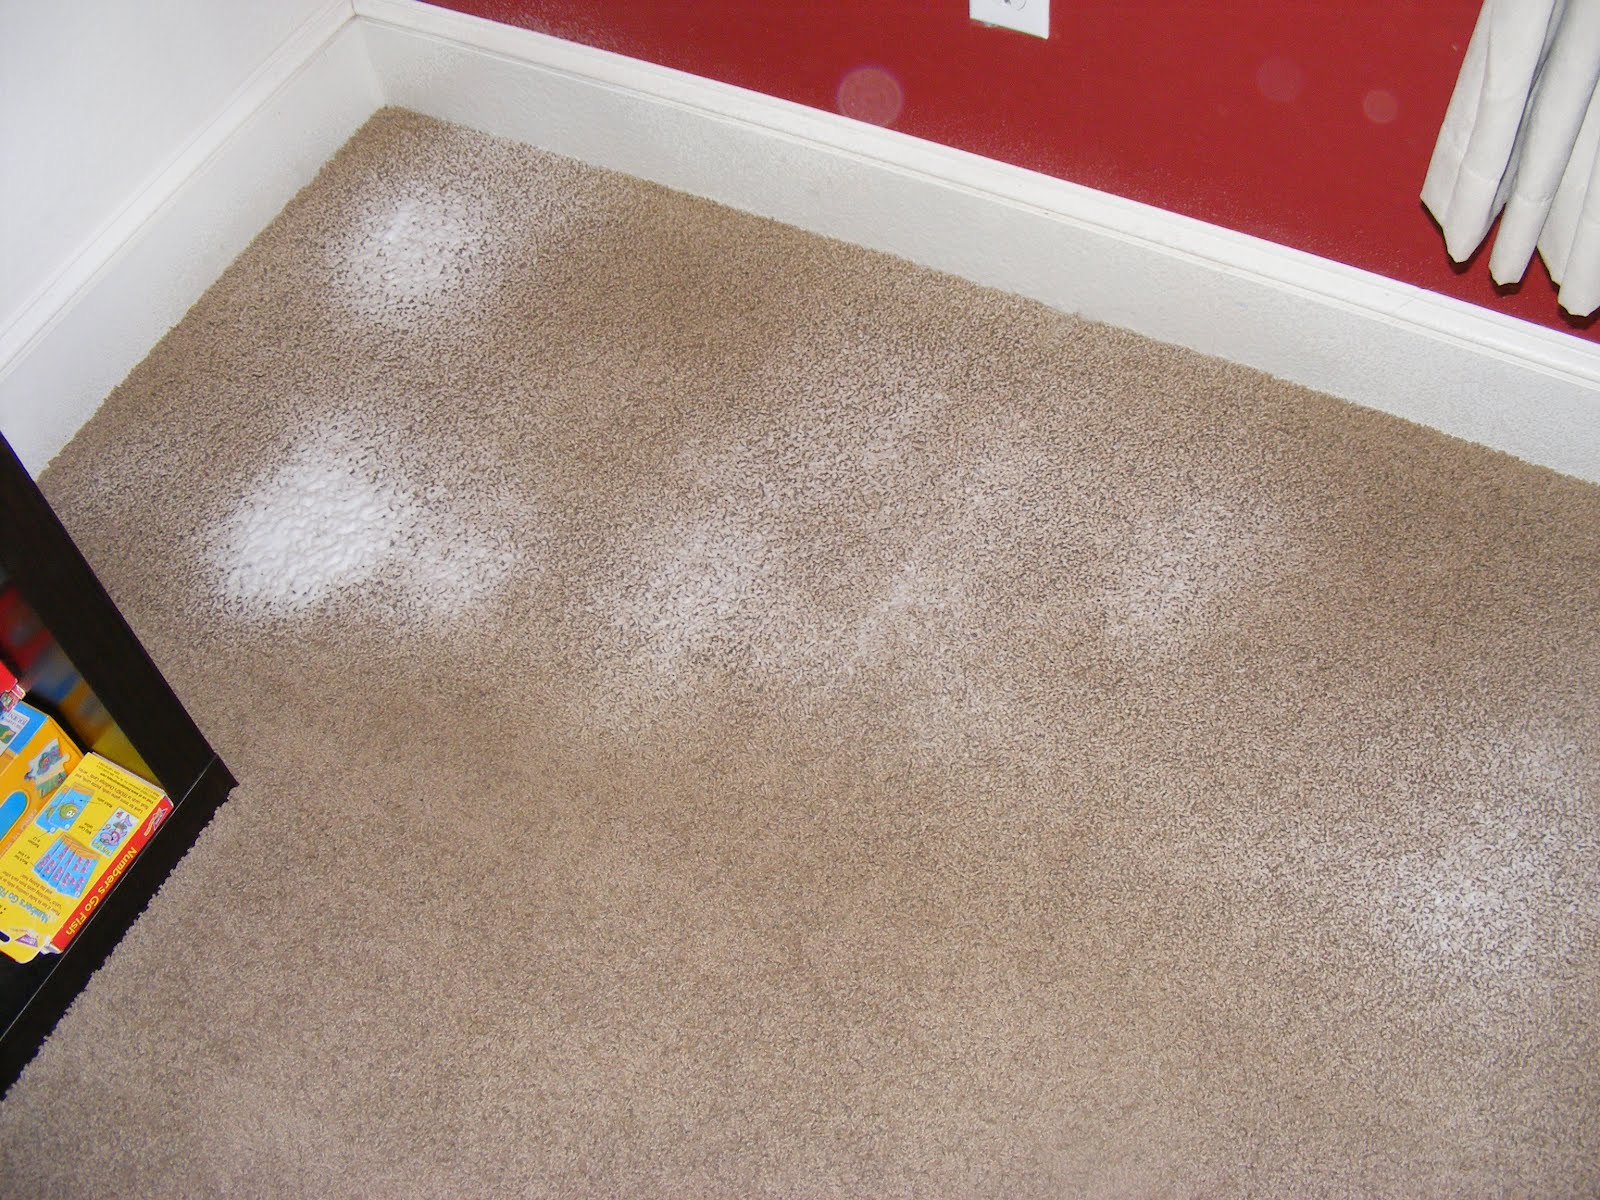 center>Cleaning Your Carpet (Without a Carpet Cleaner)</center>